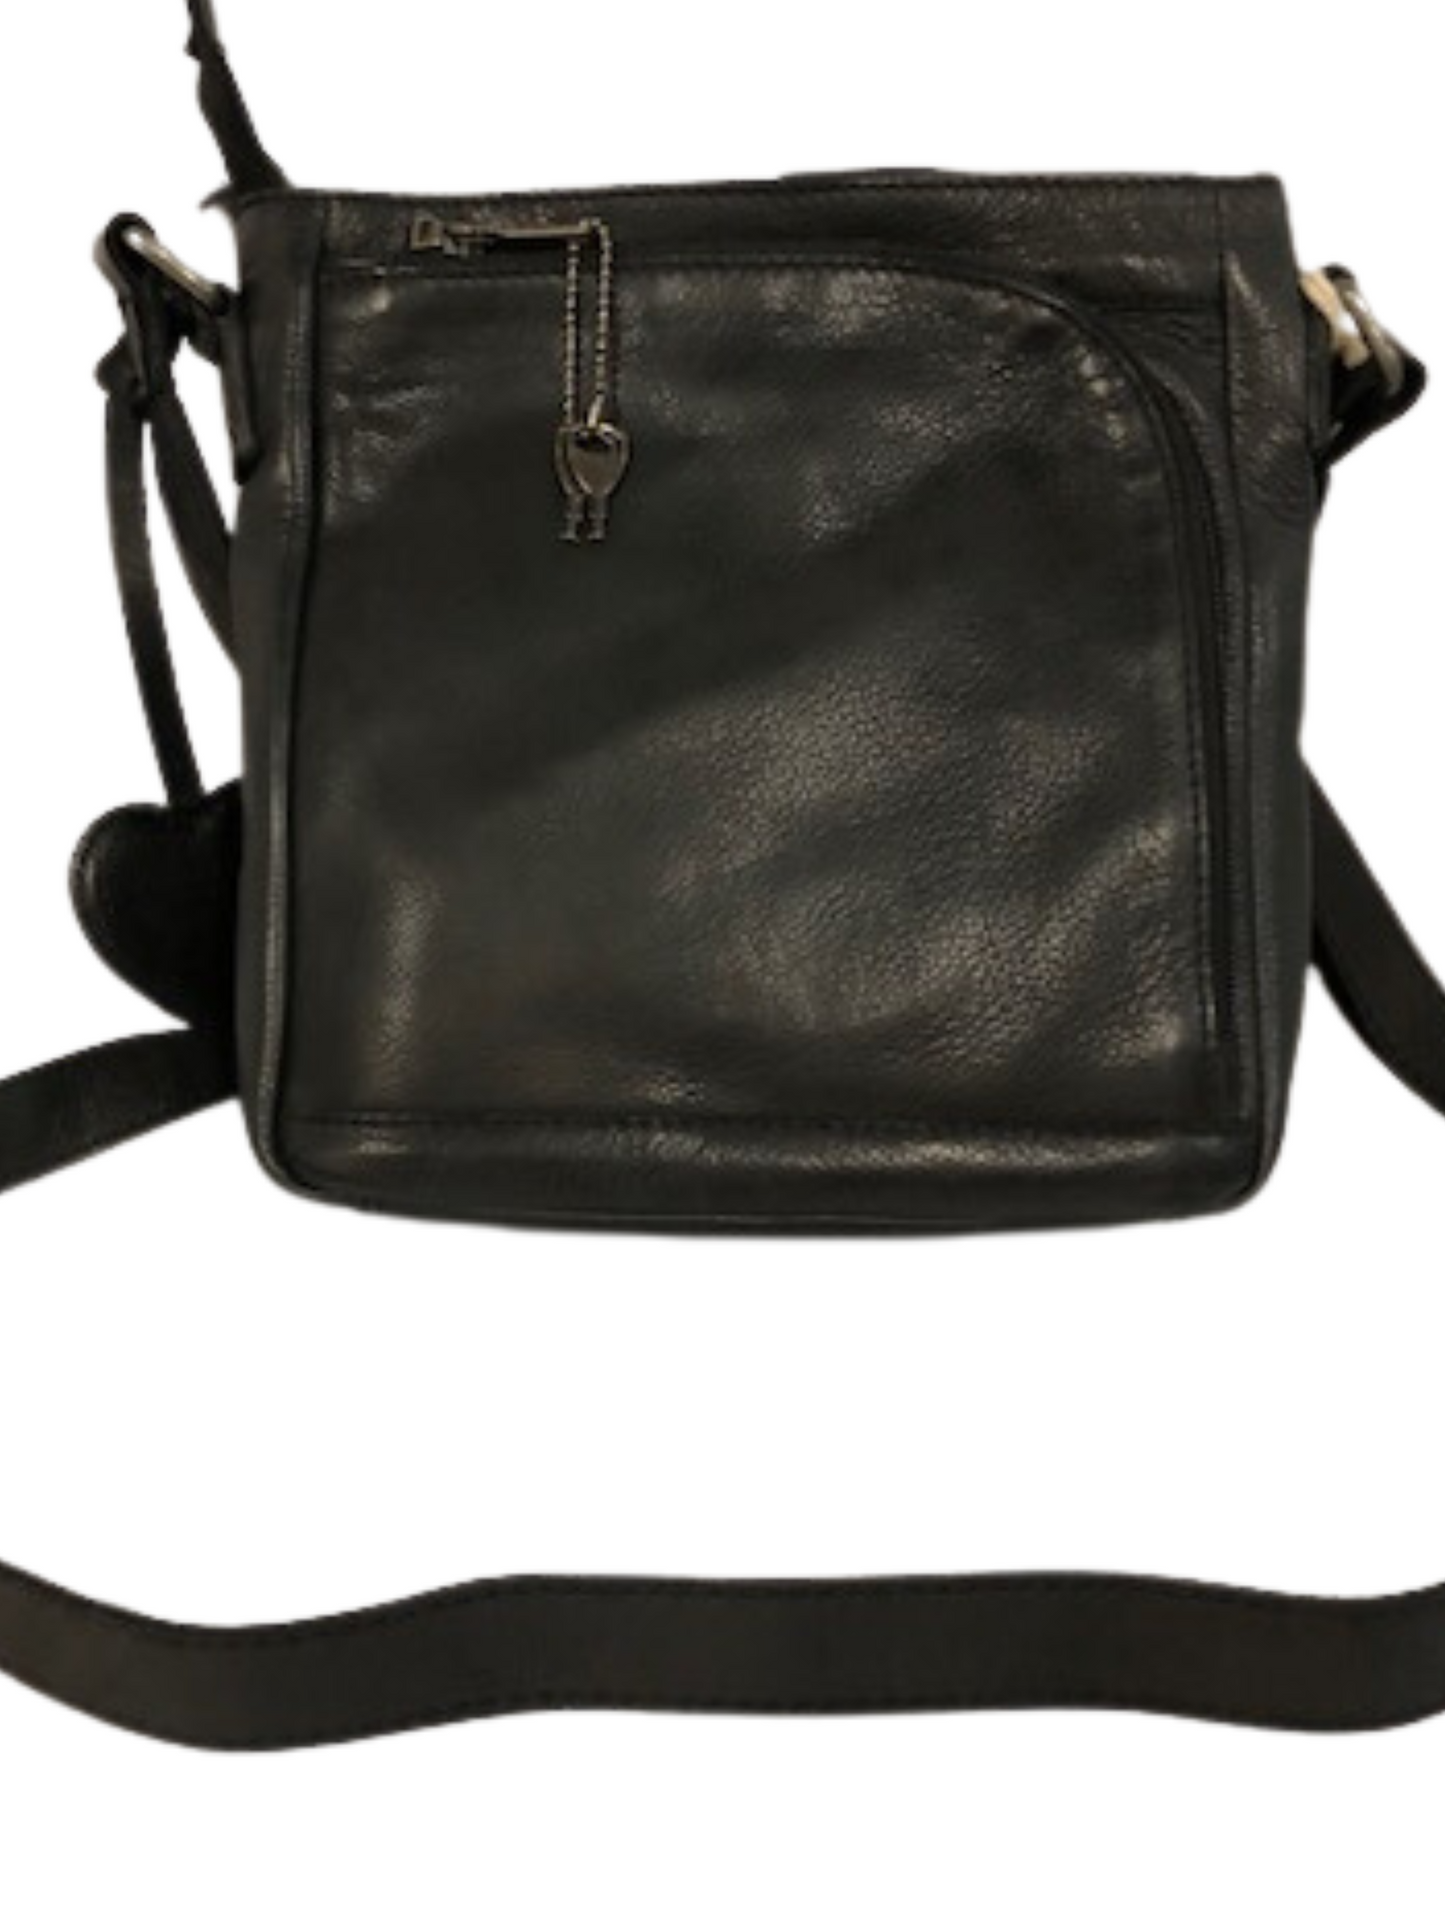 Concealed By Janko #654 Abigail Black Conceal and Carry Handbag Soft Buttery Stavenger Leather